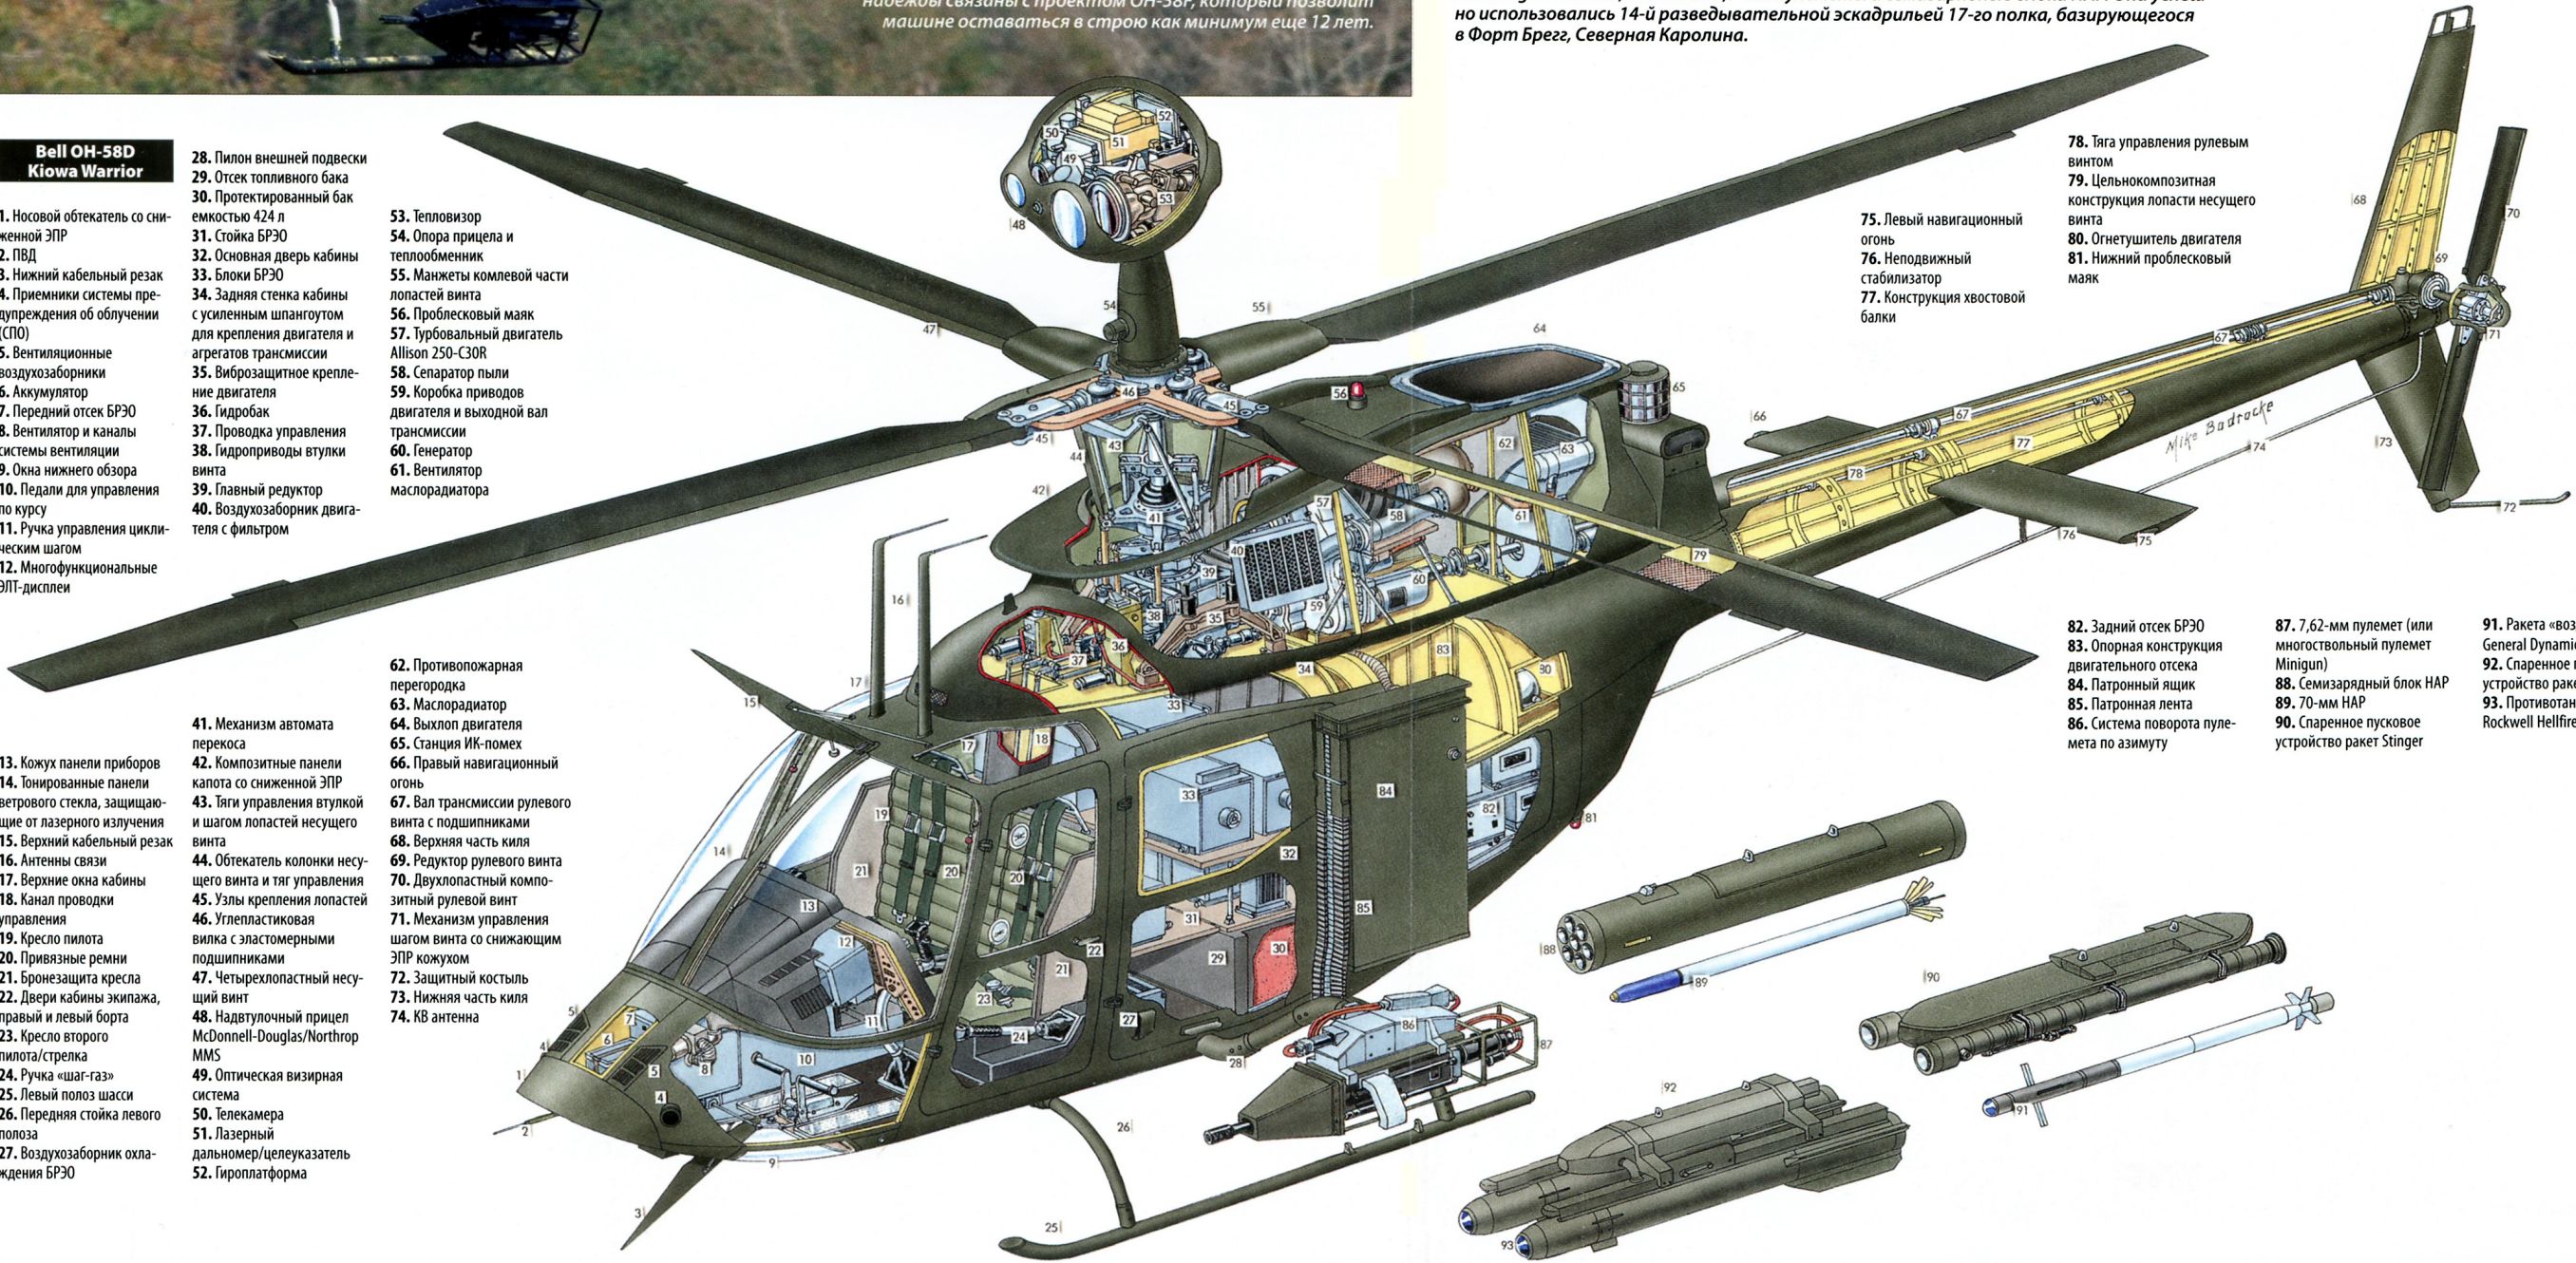 Bell OH-58 Kiowa Pics, Military Collection